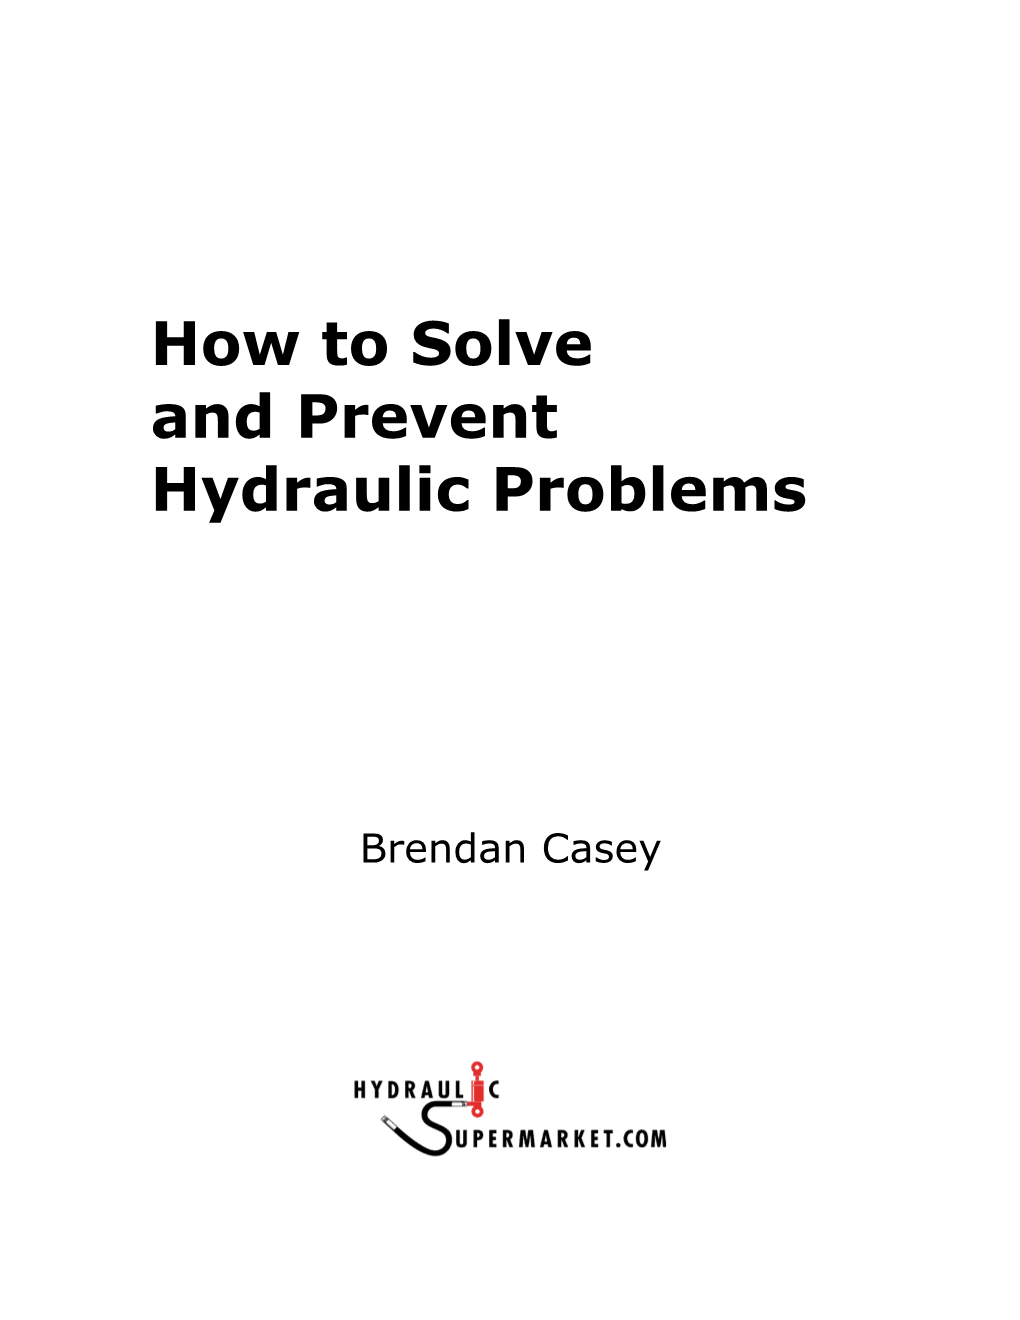 How to Solve and Prevent Hydraulic Problems